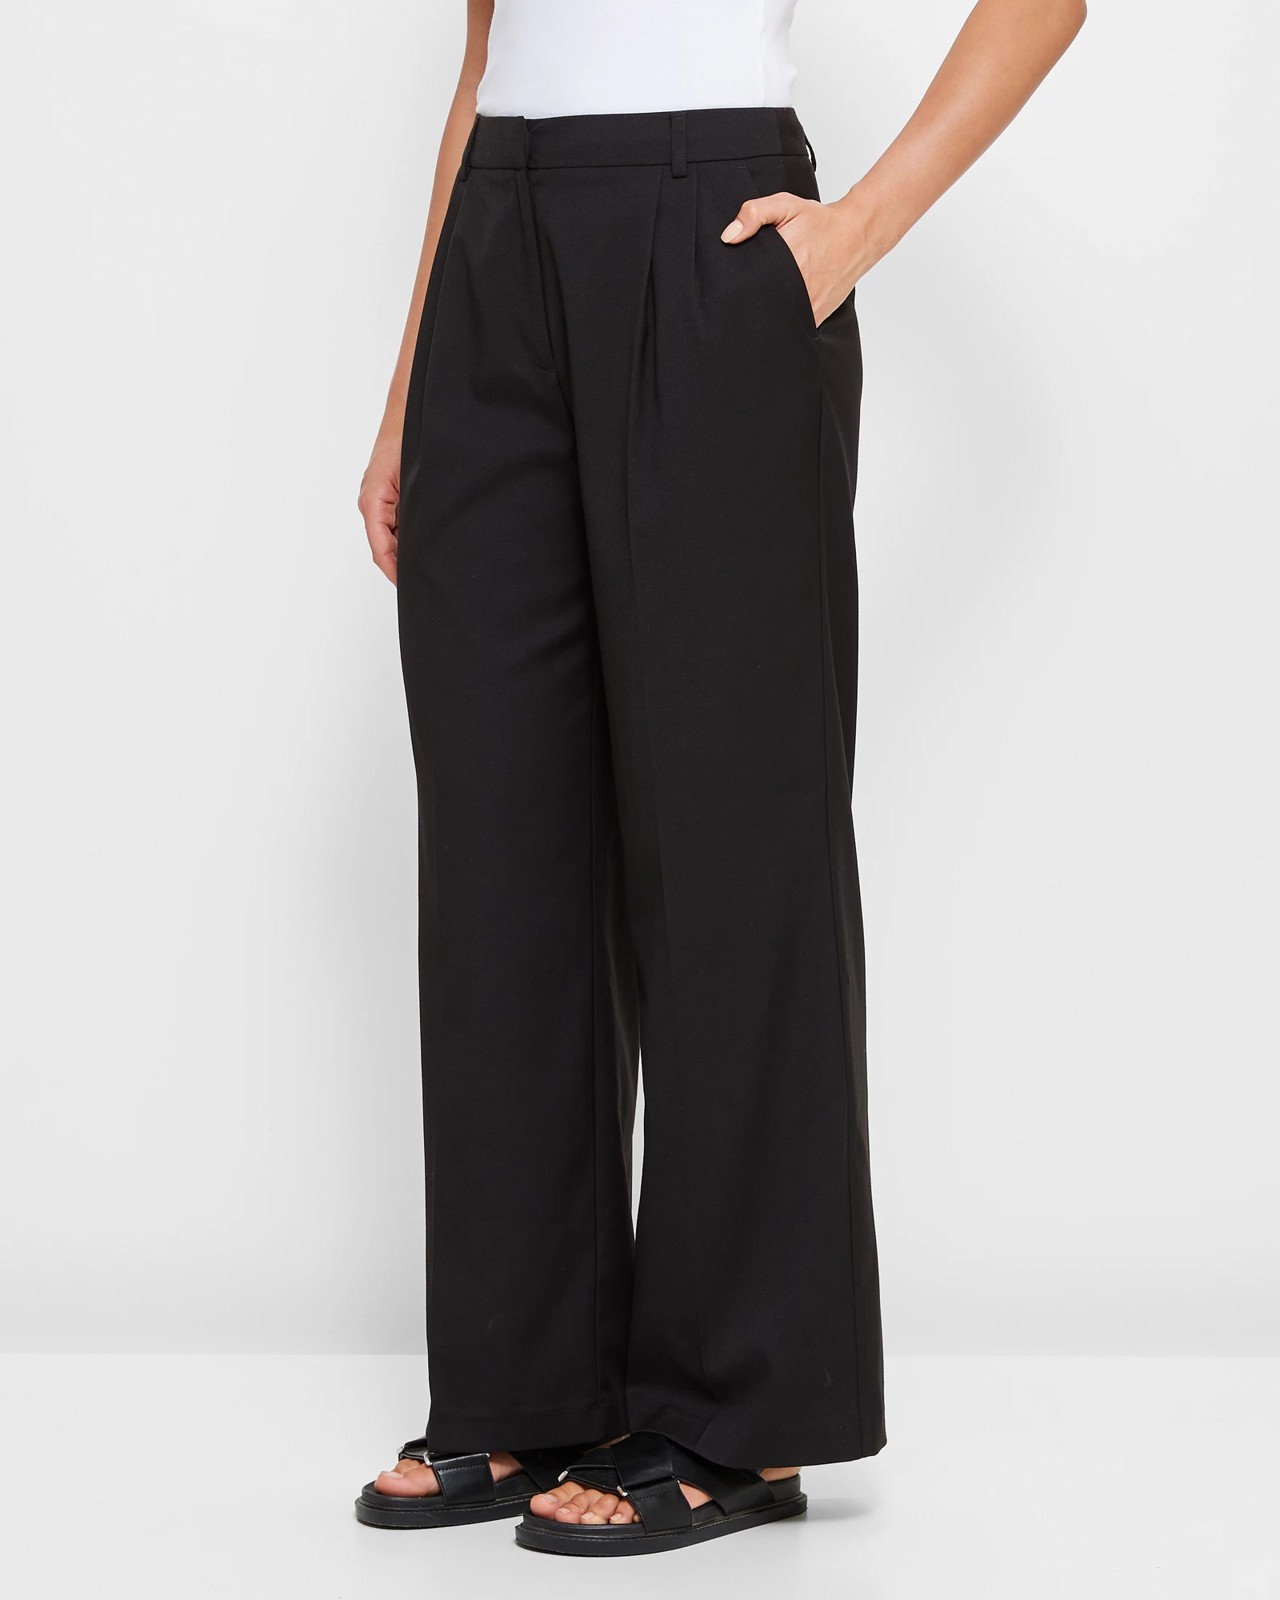 5 Black Pant Outfits To Try This Week - A Lily Love Affair